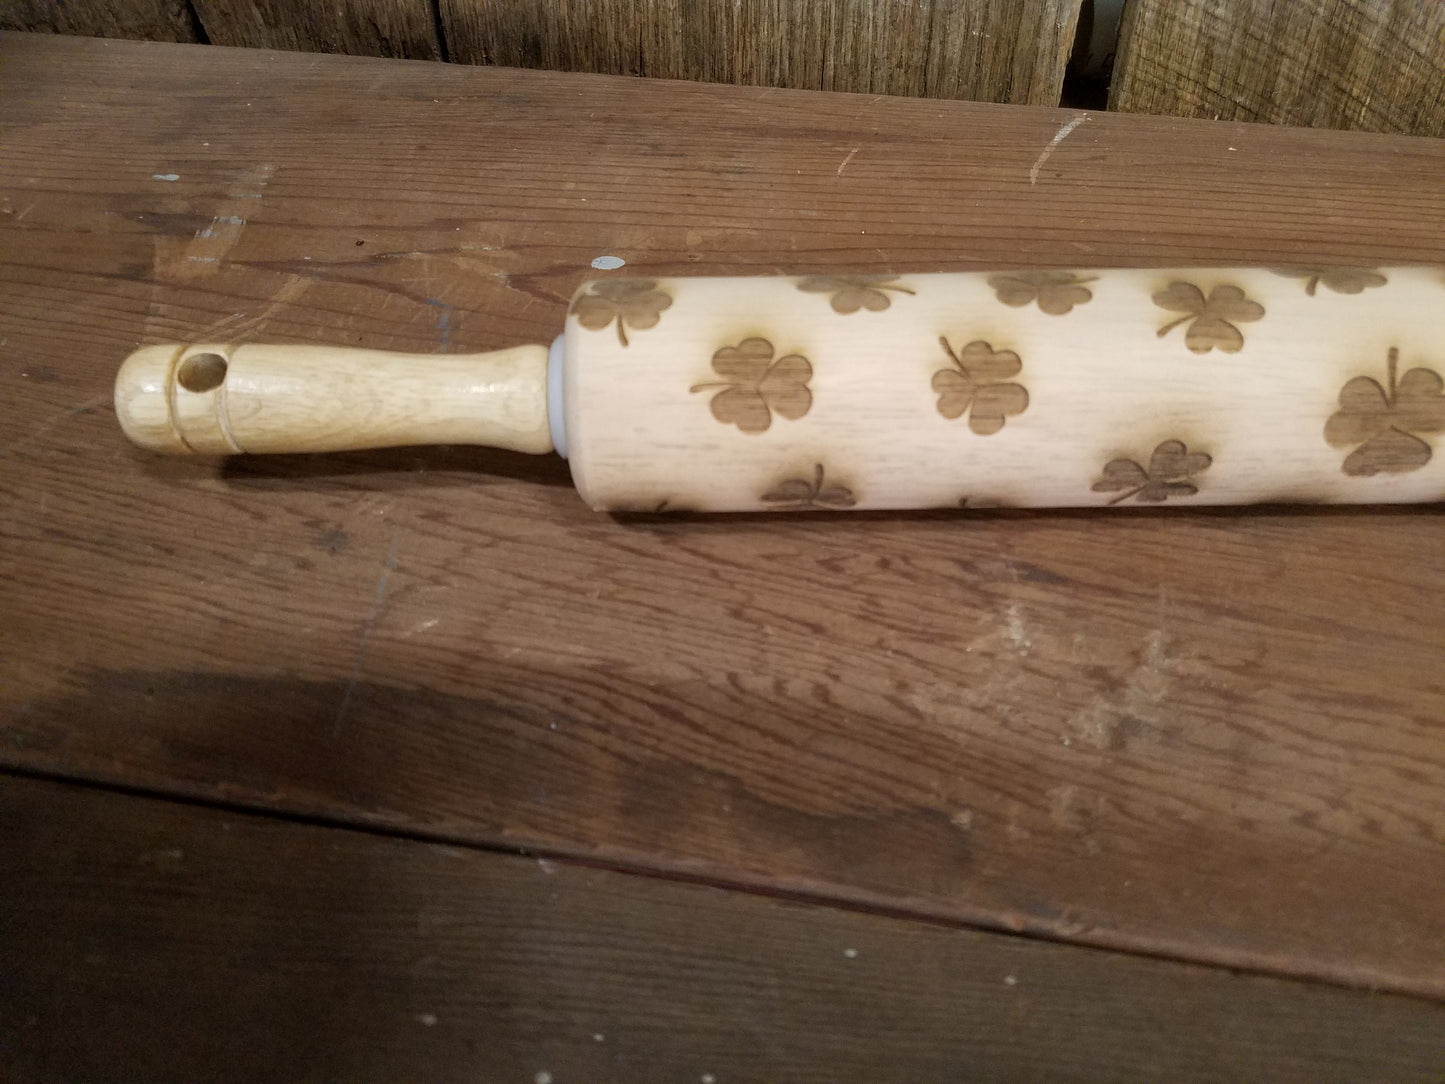 Shamrock, Four Leaf Clover, Lucky, Irish, St Patricks Day,  10 Inch Rolling Pin, Pie Crust, Gift, Embossed, Engraved, Wood, Cookie Stamp